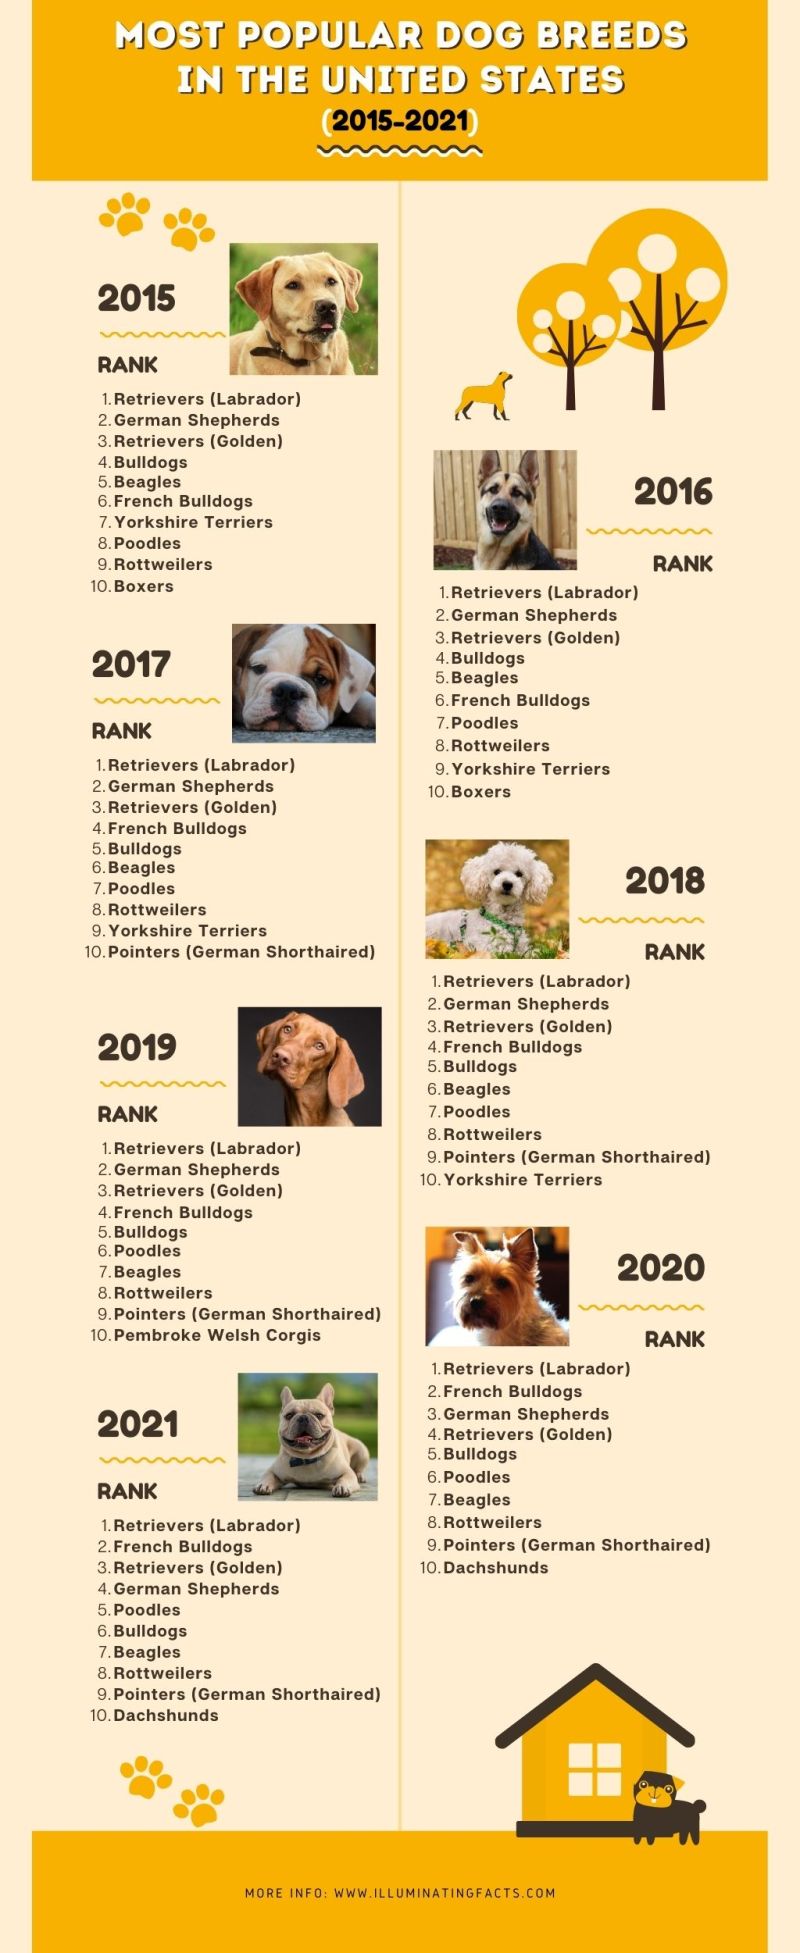 Most Popular Dog Breeds in the United States (2015-2021)